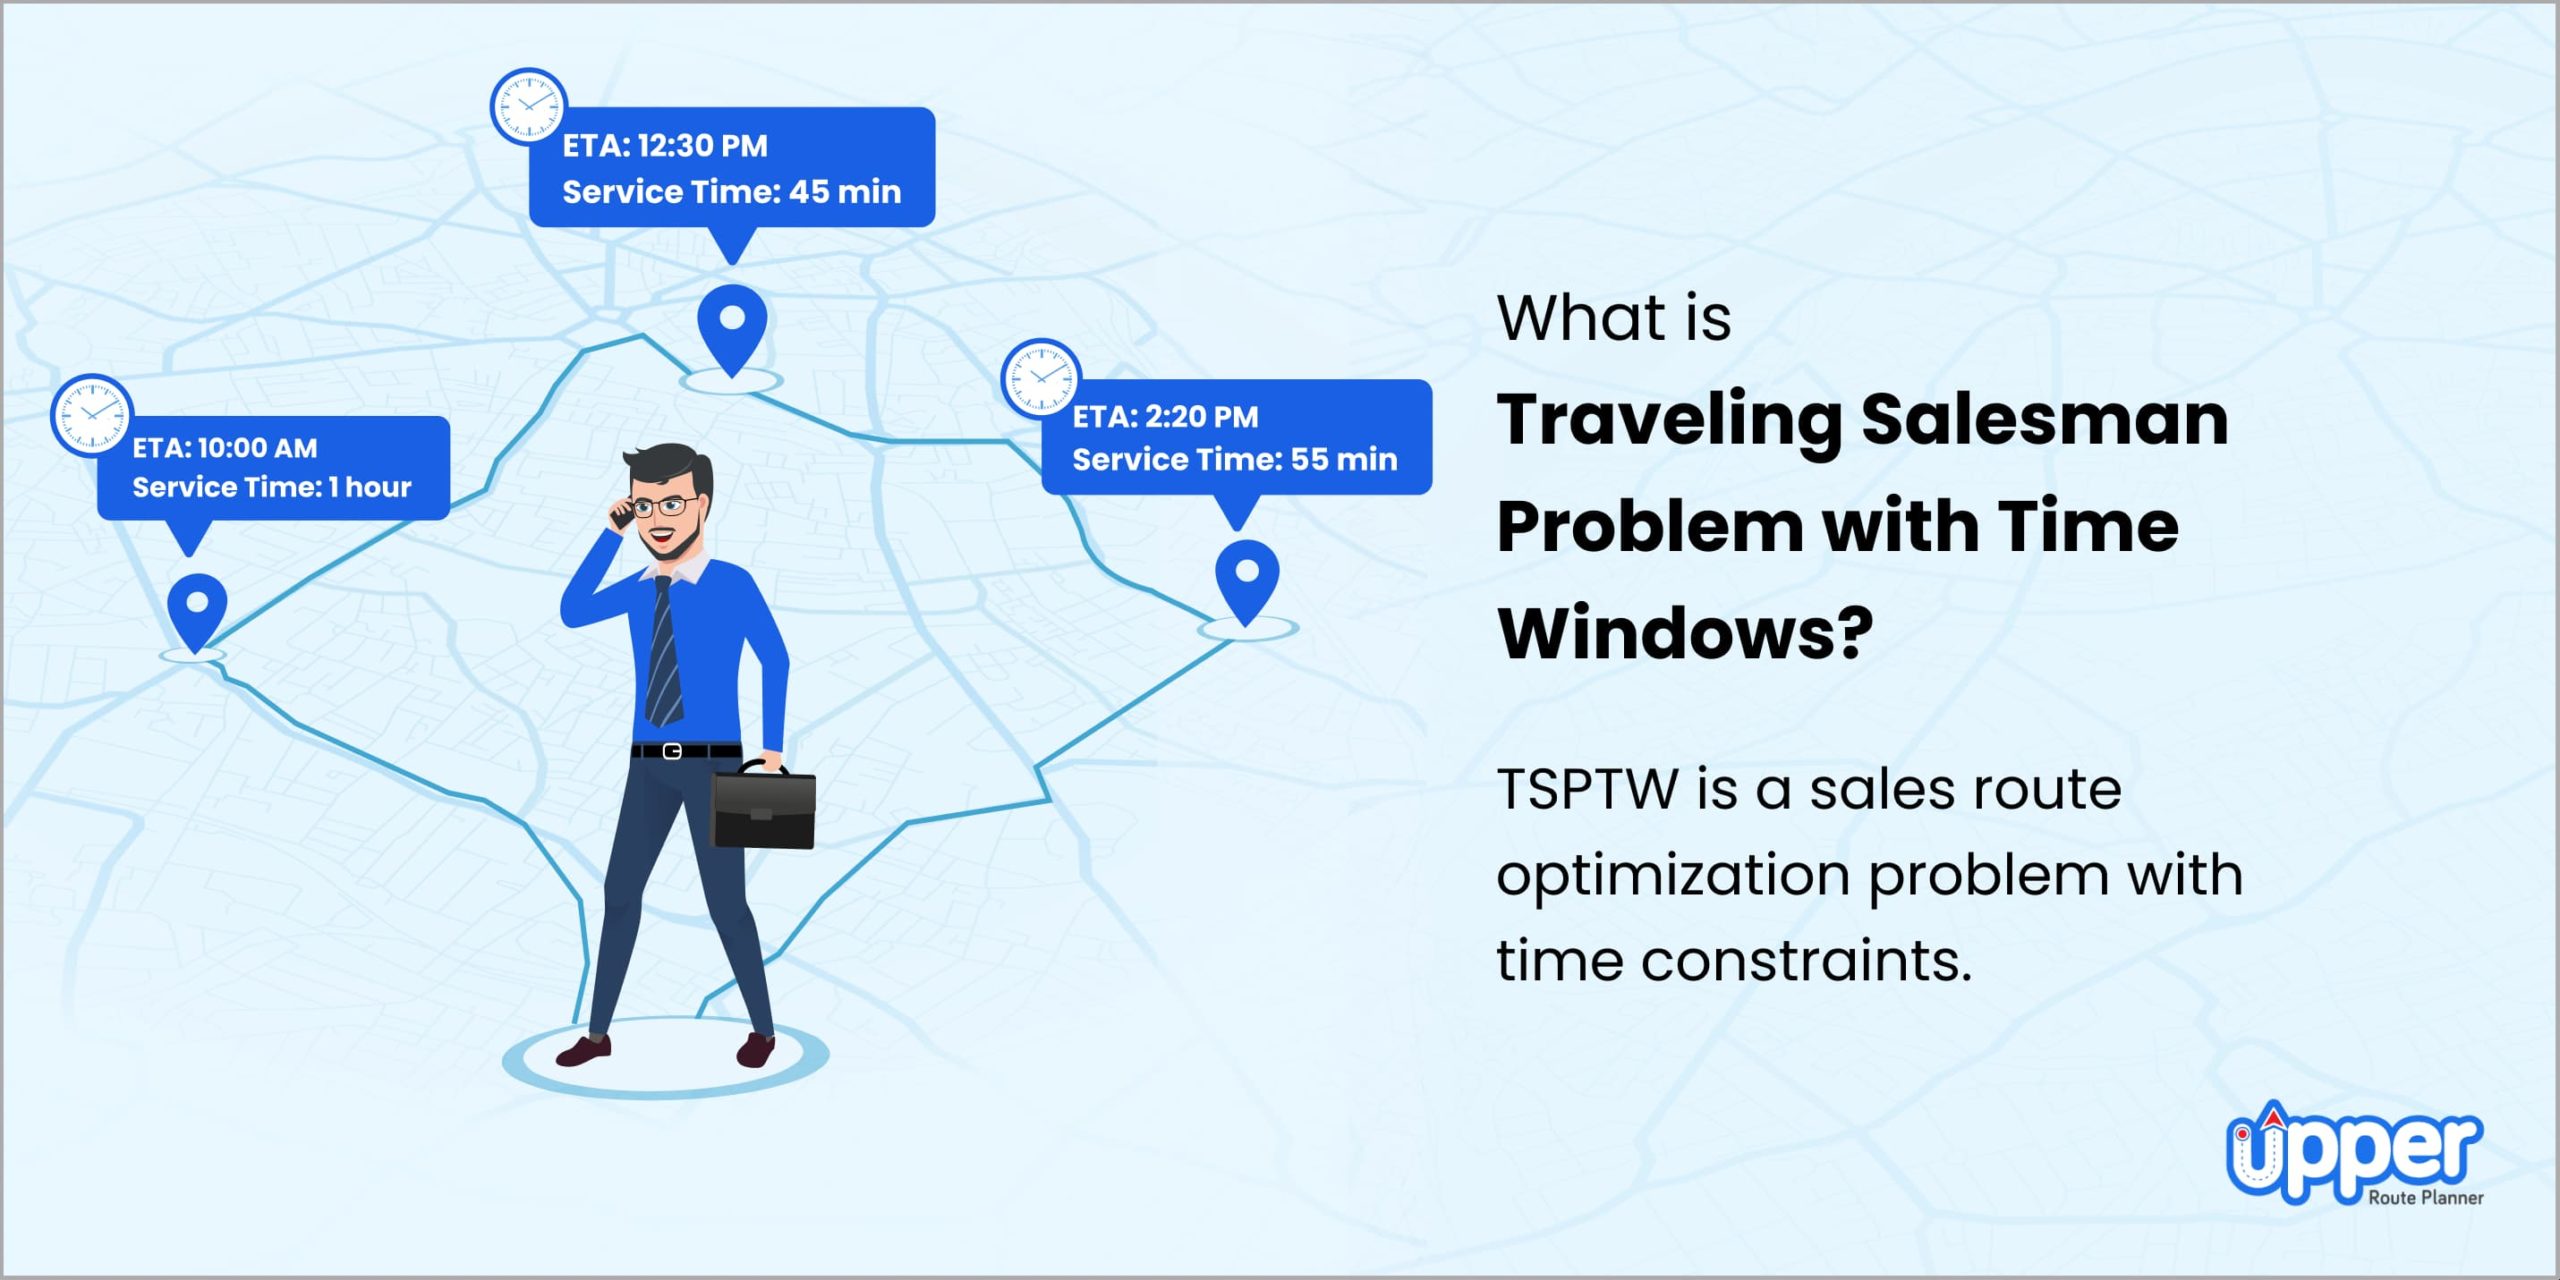 What is traveling salesman problem with time windows